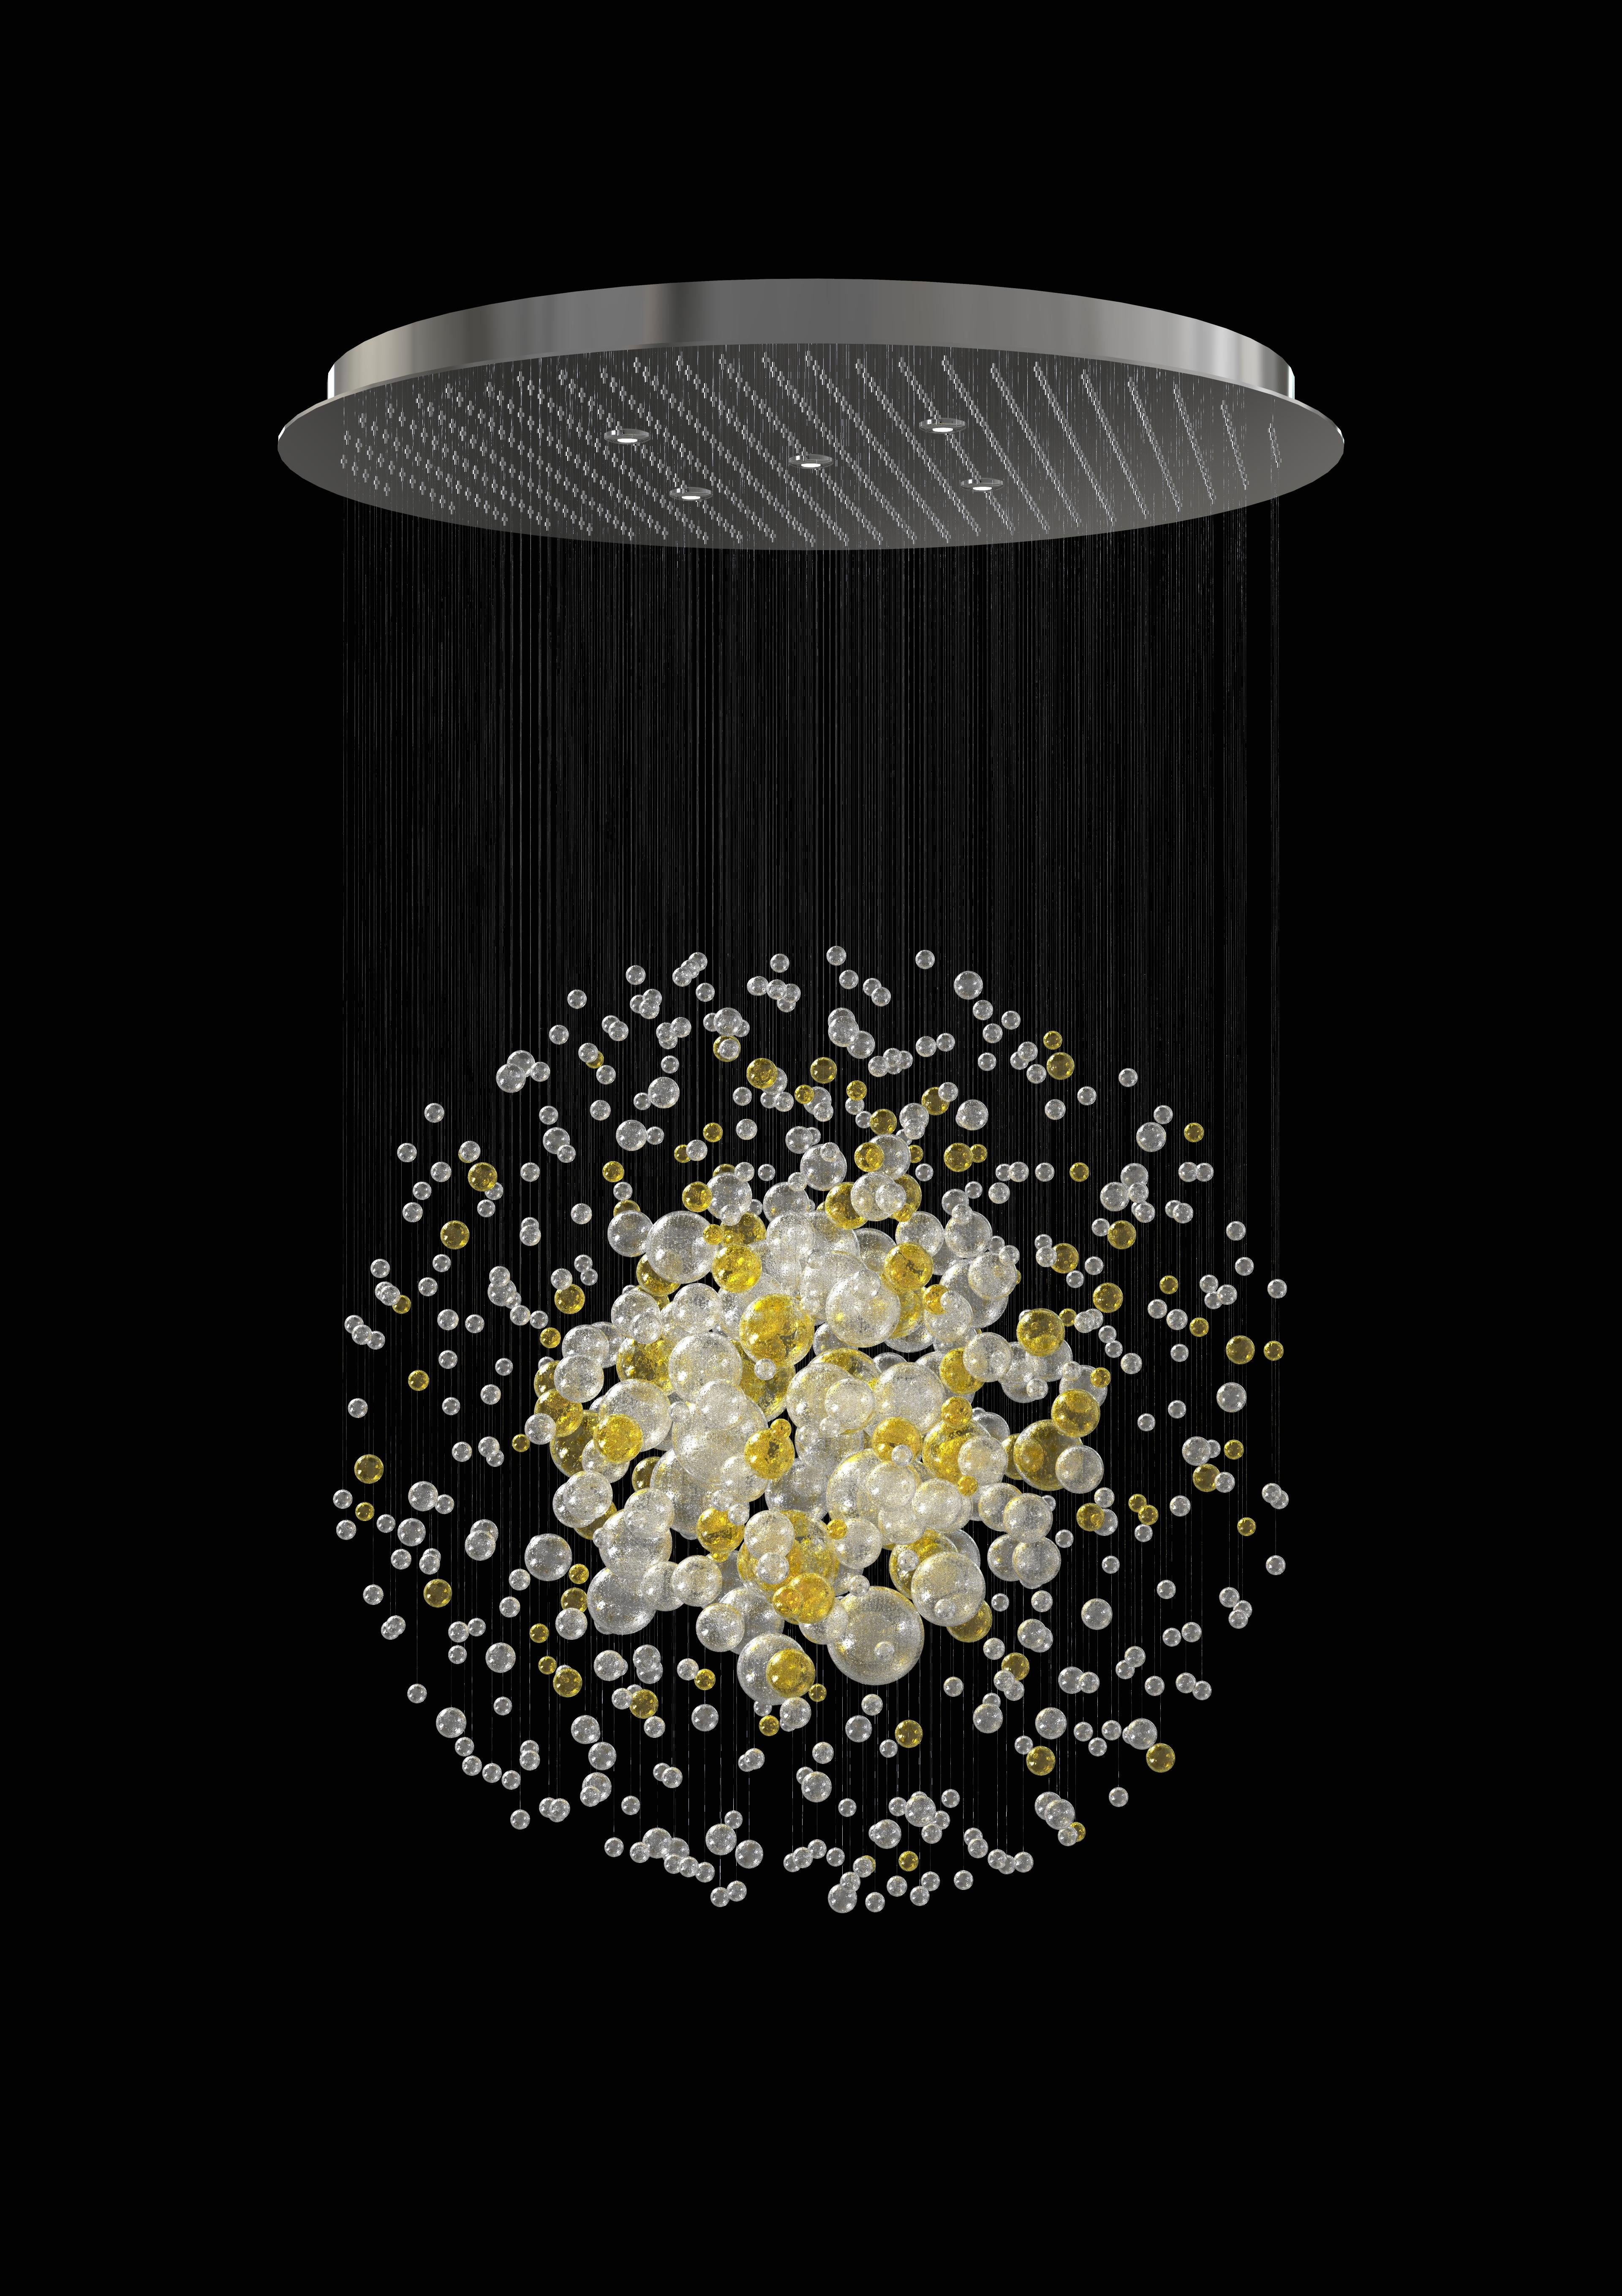 Bubbles in Space is an icon of organic timeless design. This ethereal object is a rendition of an explosion of bubbles in space which transports the viewer to an unreal world of pure fascination. It evokes bubbles in champagne fizzing through the